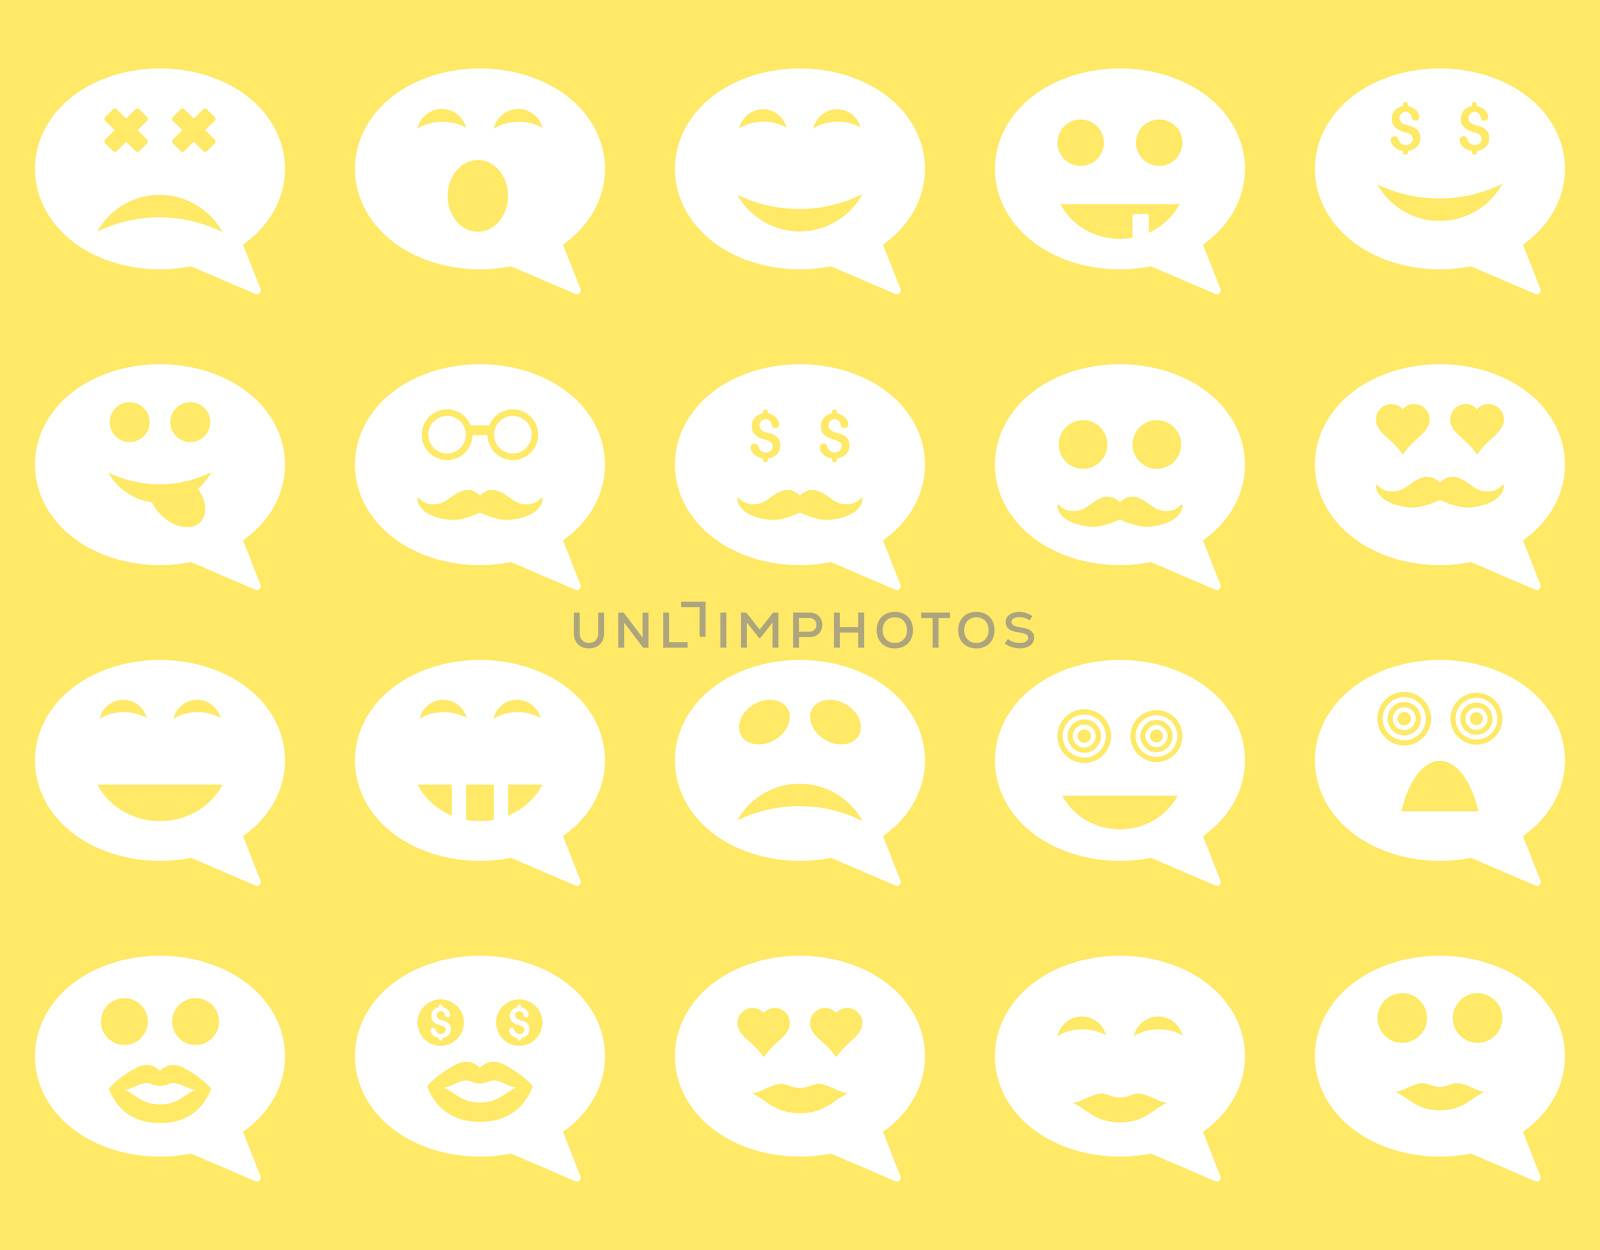 Chat emotion smile icons. Glyph set style is flat images, white symbols, isolated on a yellow background.